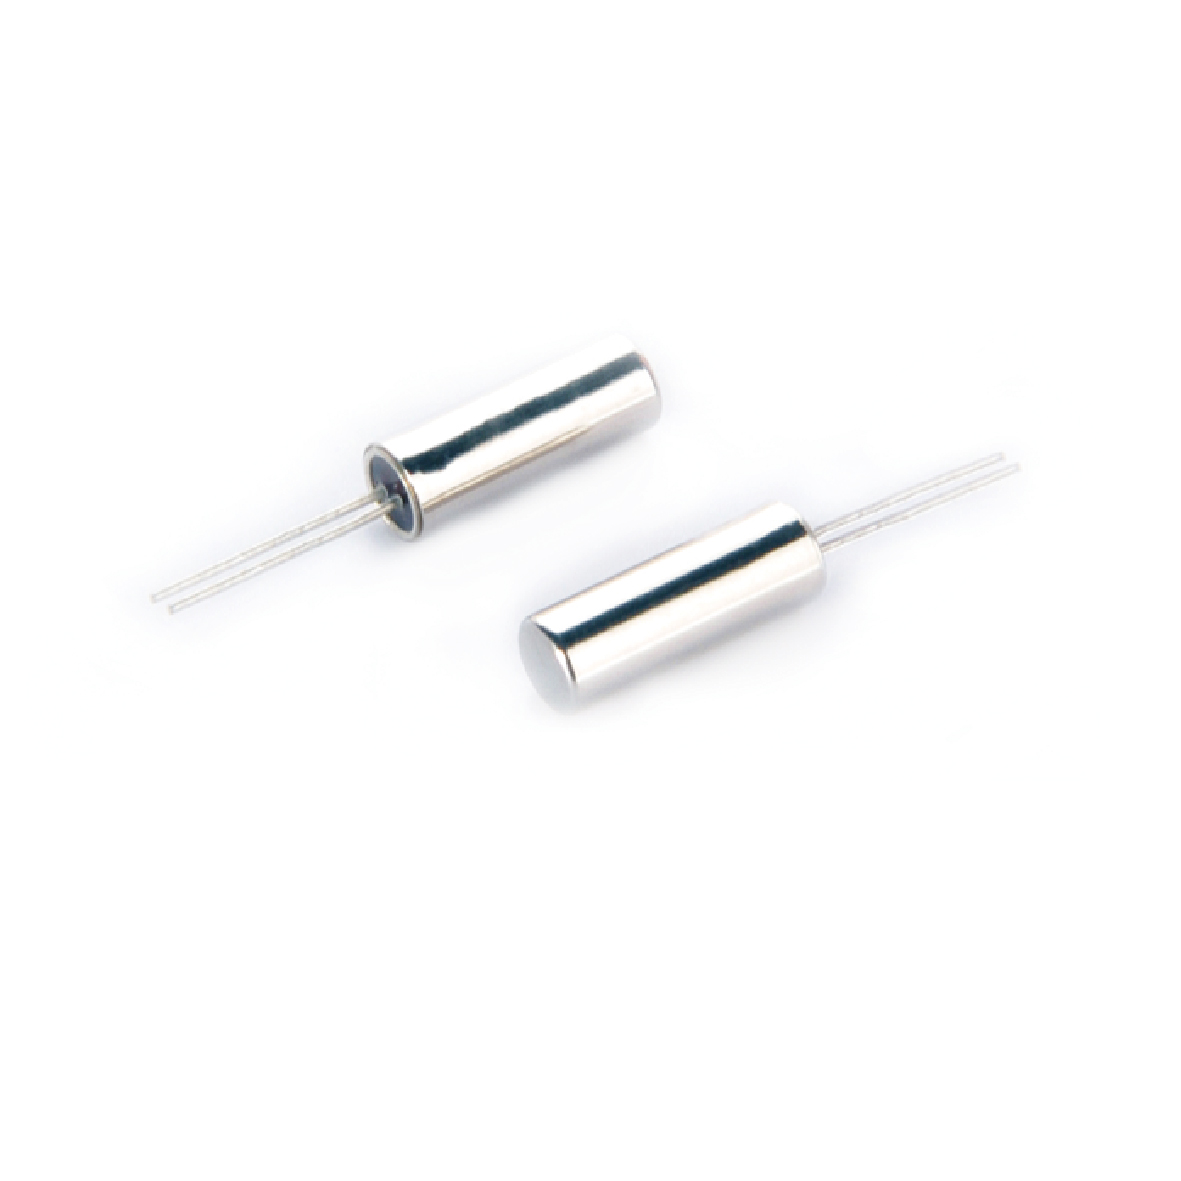 2×6 TUNING FORK(MHZ)